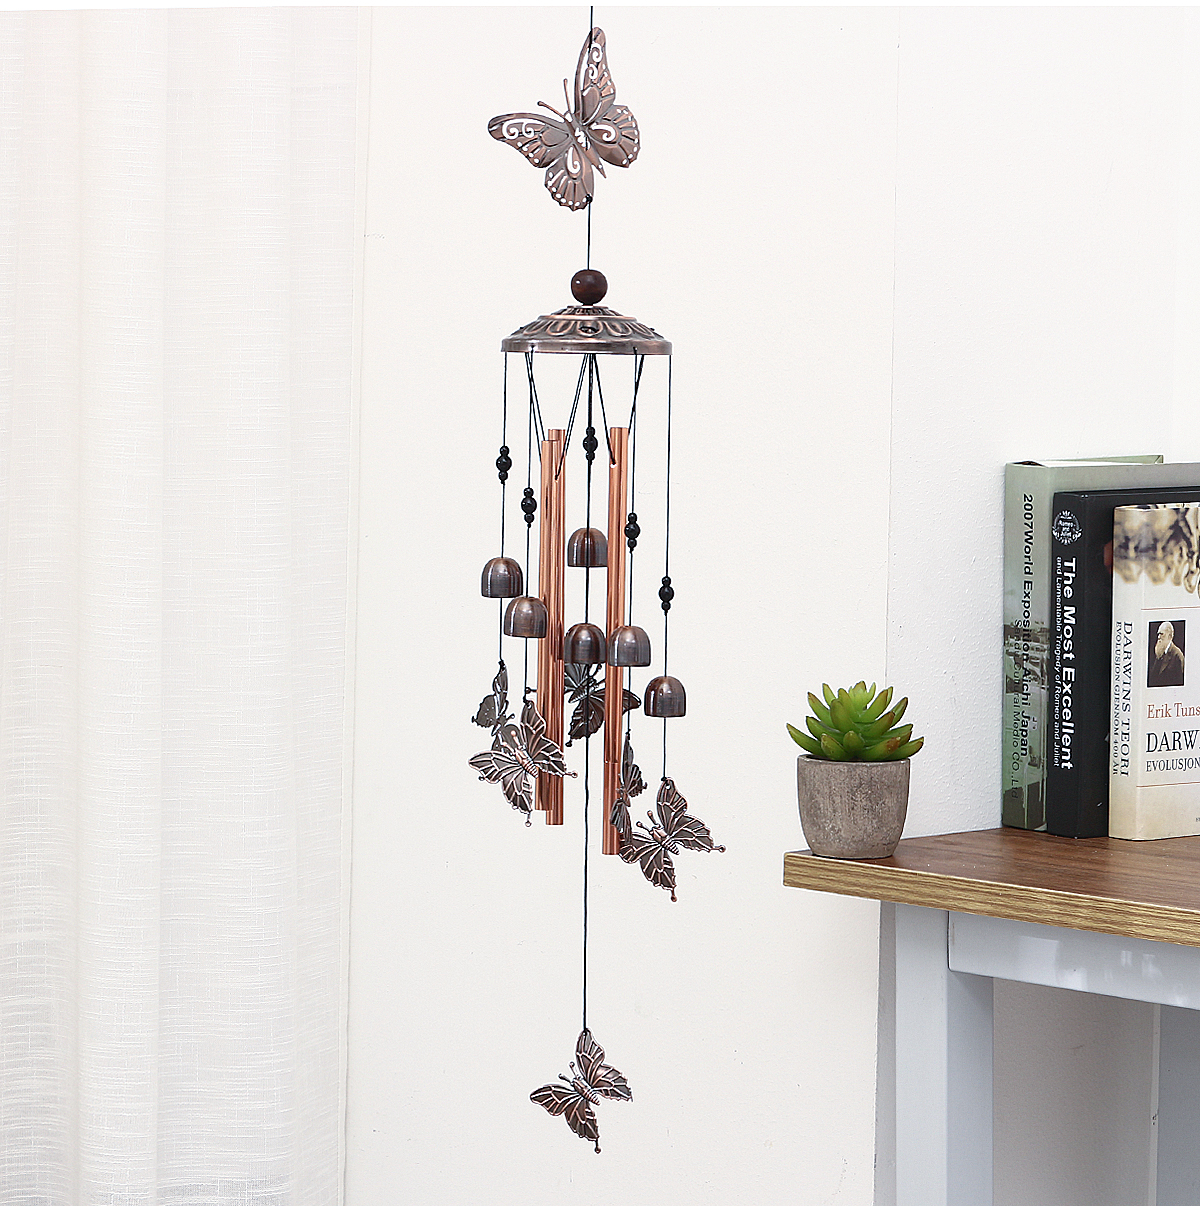 Brass-Bell-Wind-Chime-Ornaments-European-And-American-Garden-Home-Decoration-1777951-5